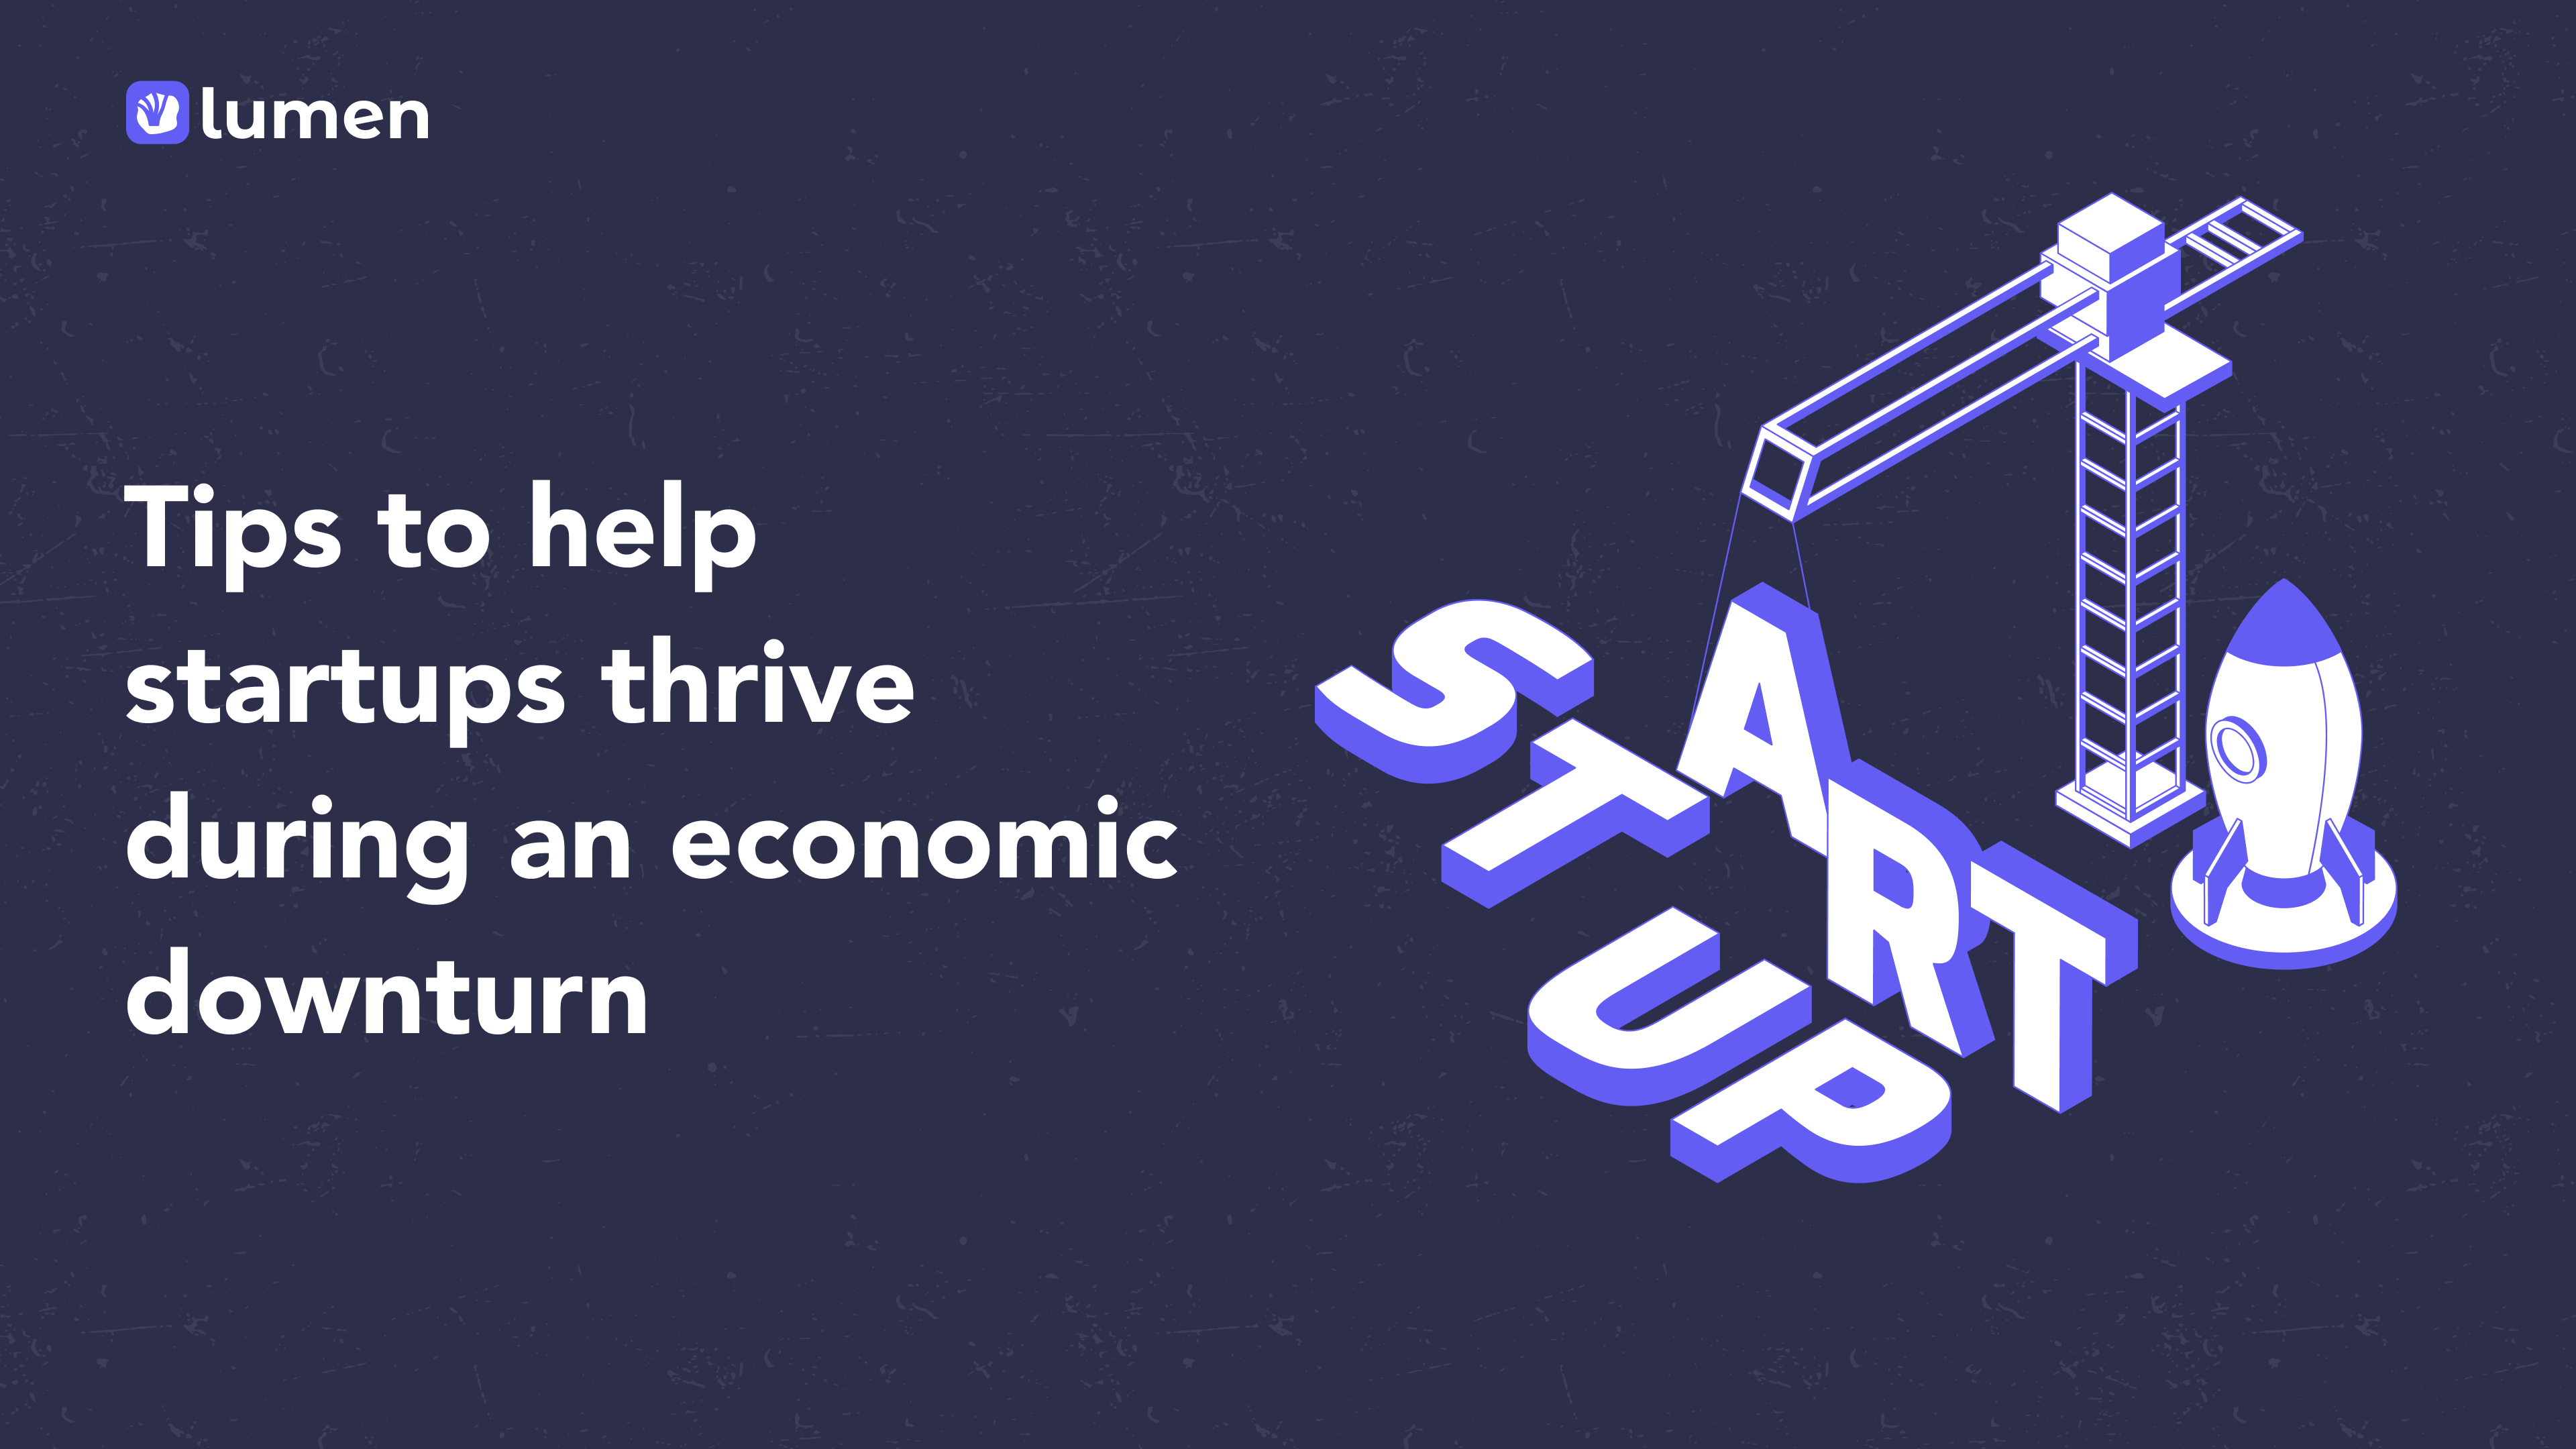 Staying afloat in a recession: 6 tips to help startups thrive during an economic downturn.